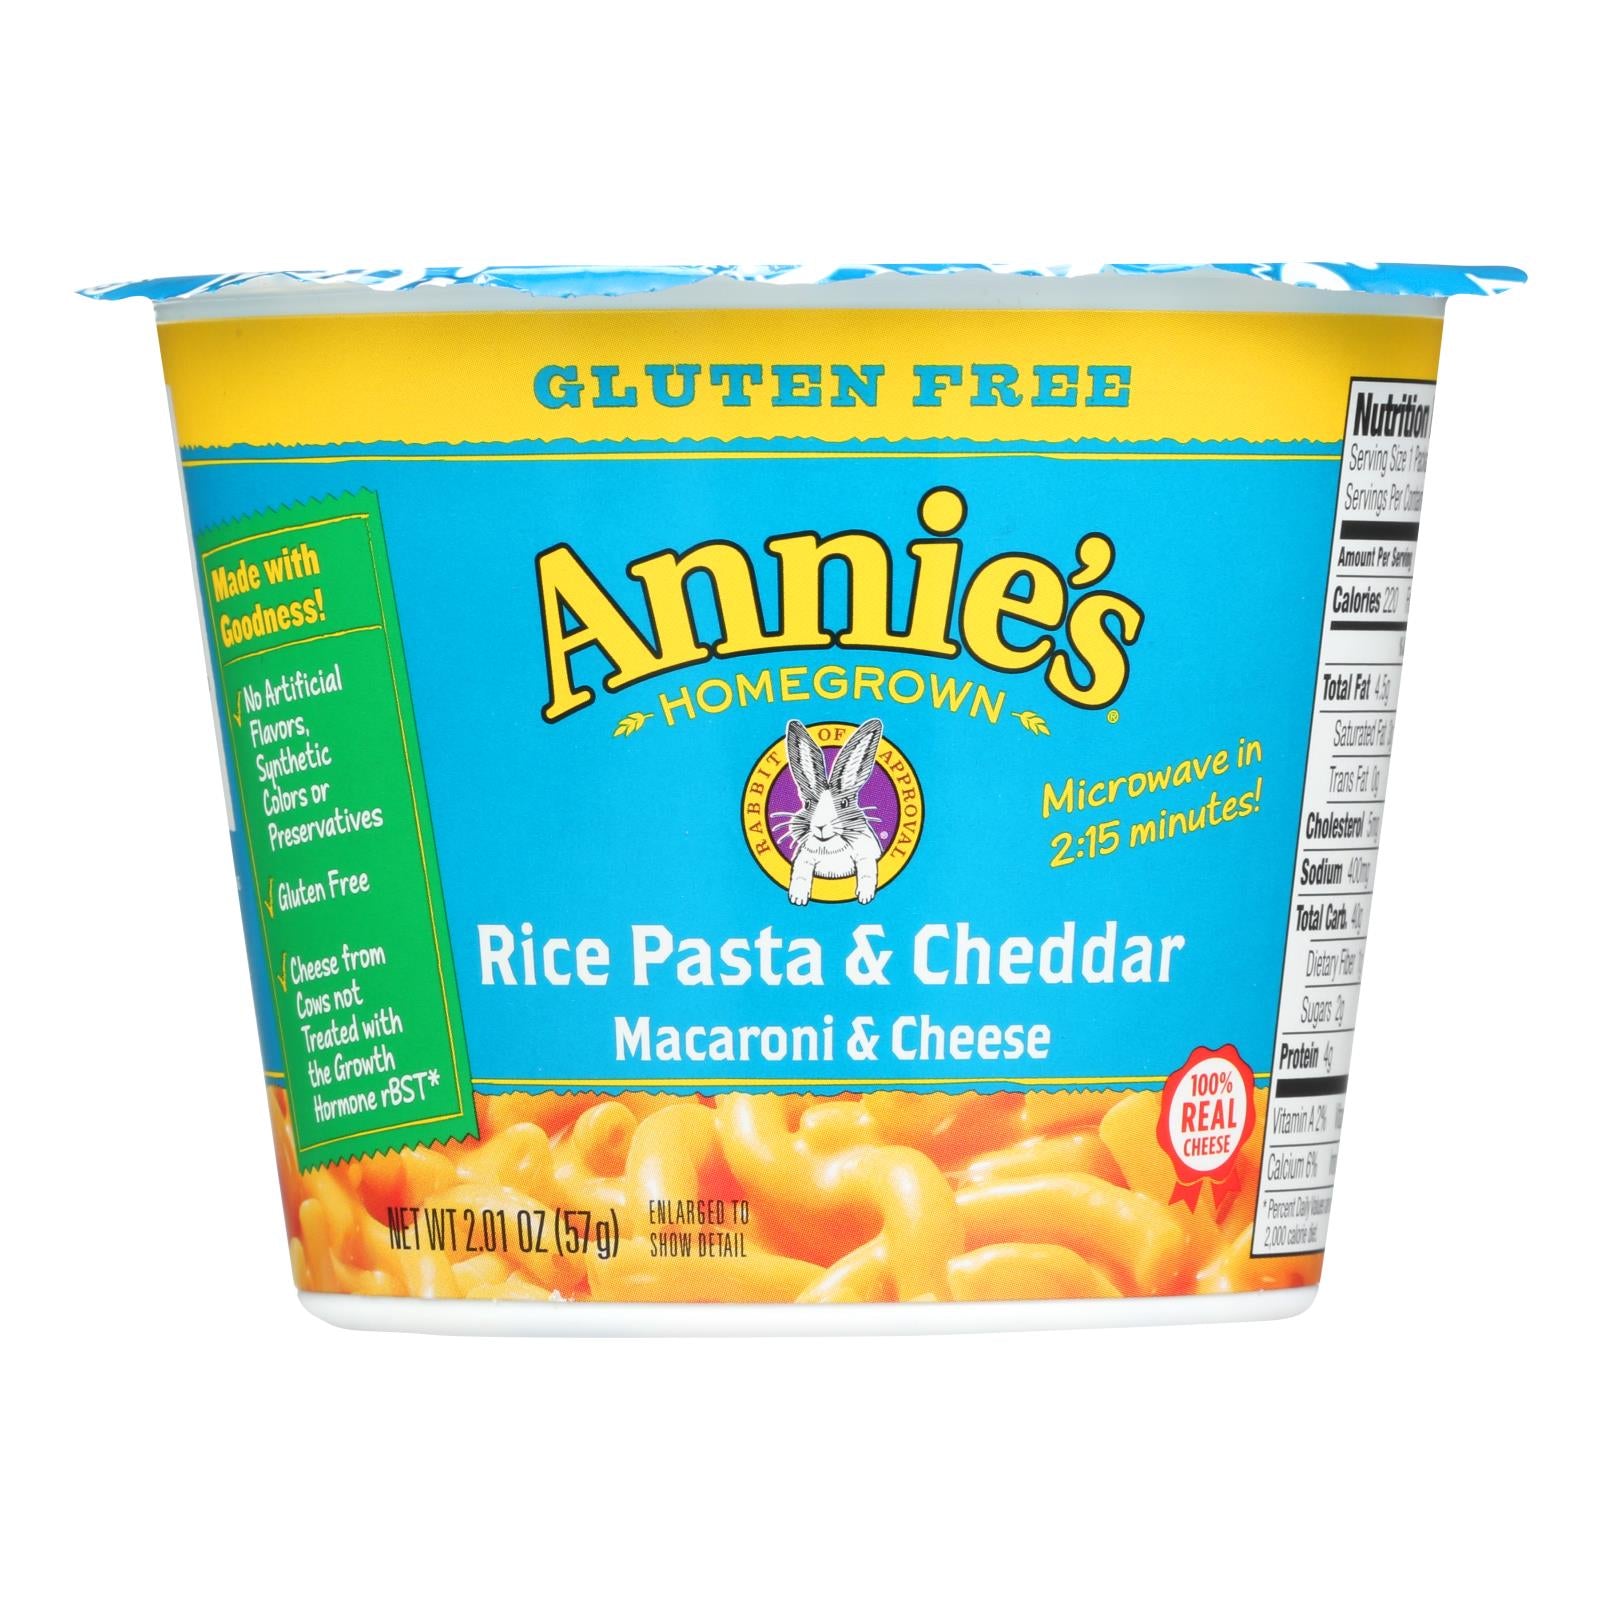 Annie's Homegrown Gluten Free Rice Pasta And Cheddar Microwavable Mac And Cheese Cup - Case Of 12 - 2.01 Oz.